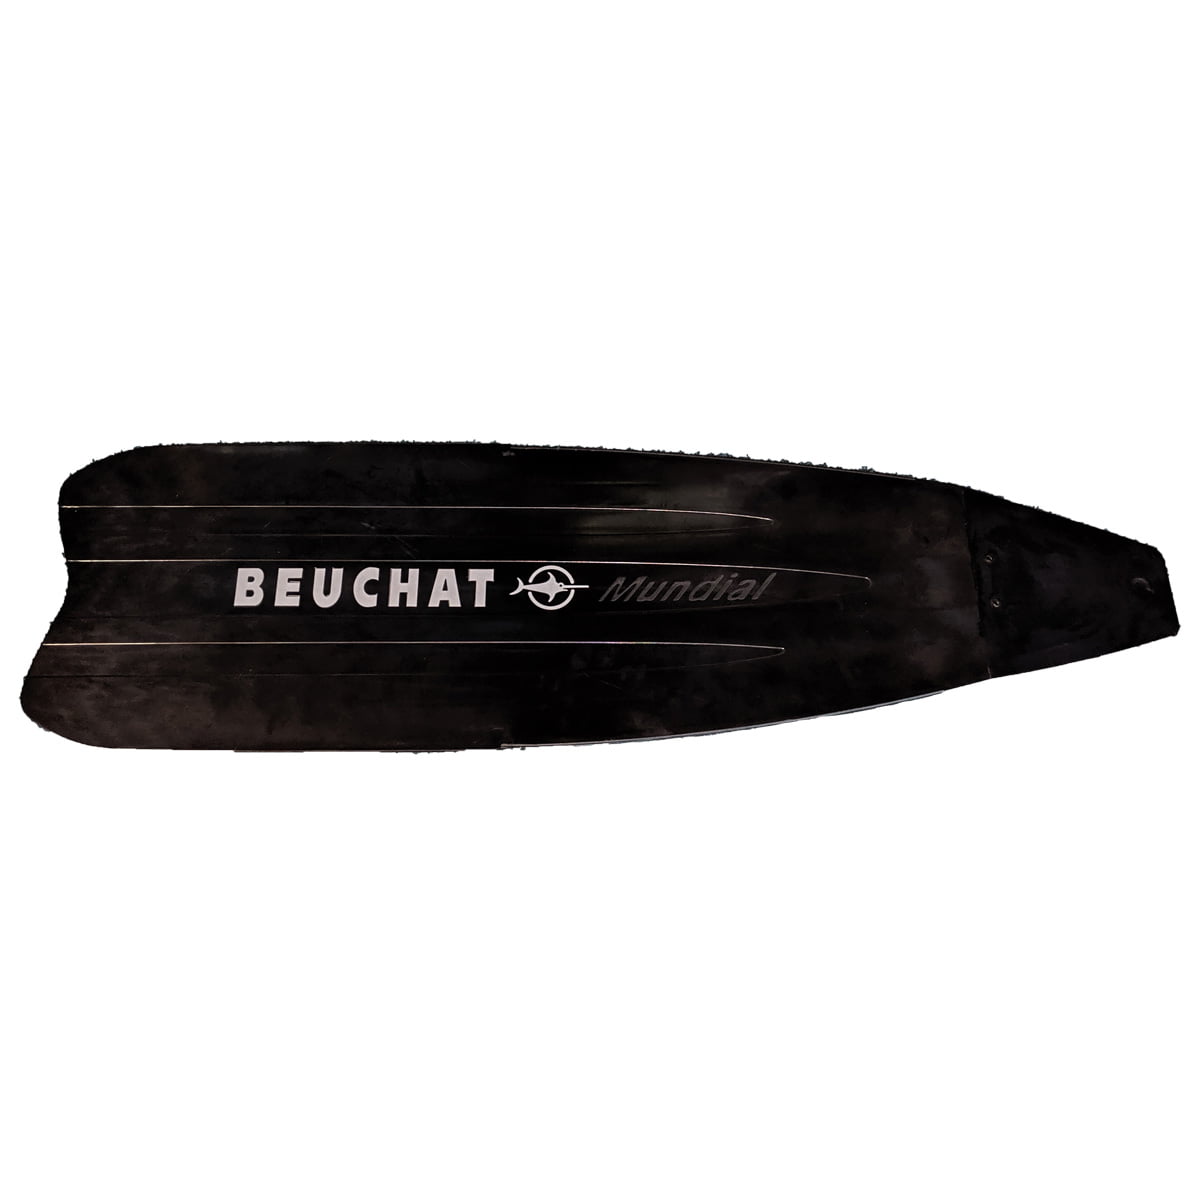 Beuchat Mundial Competition Fins 